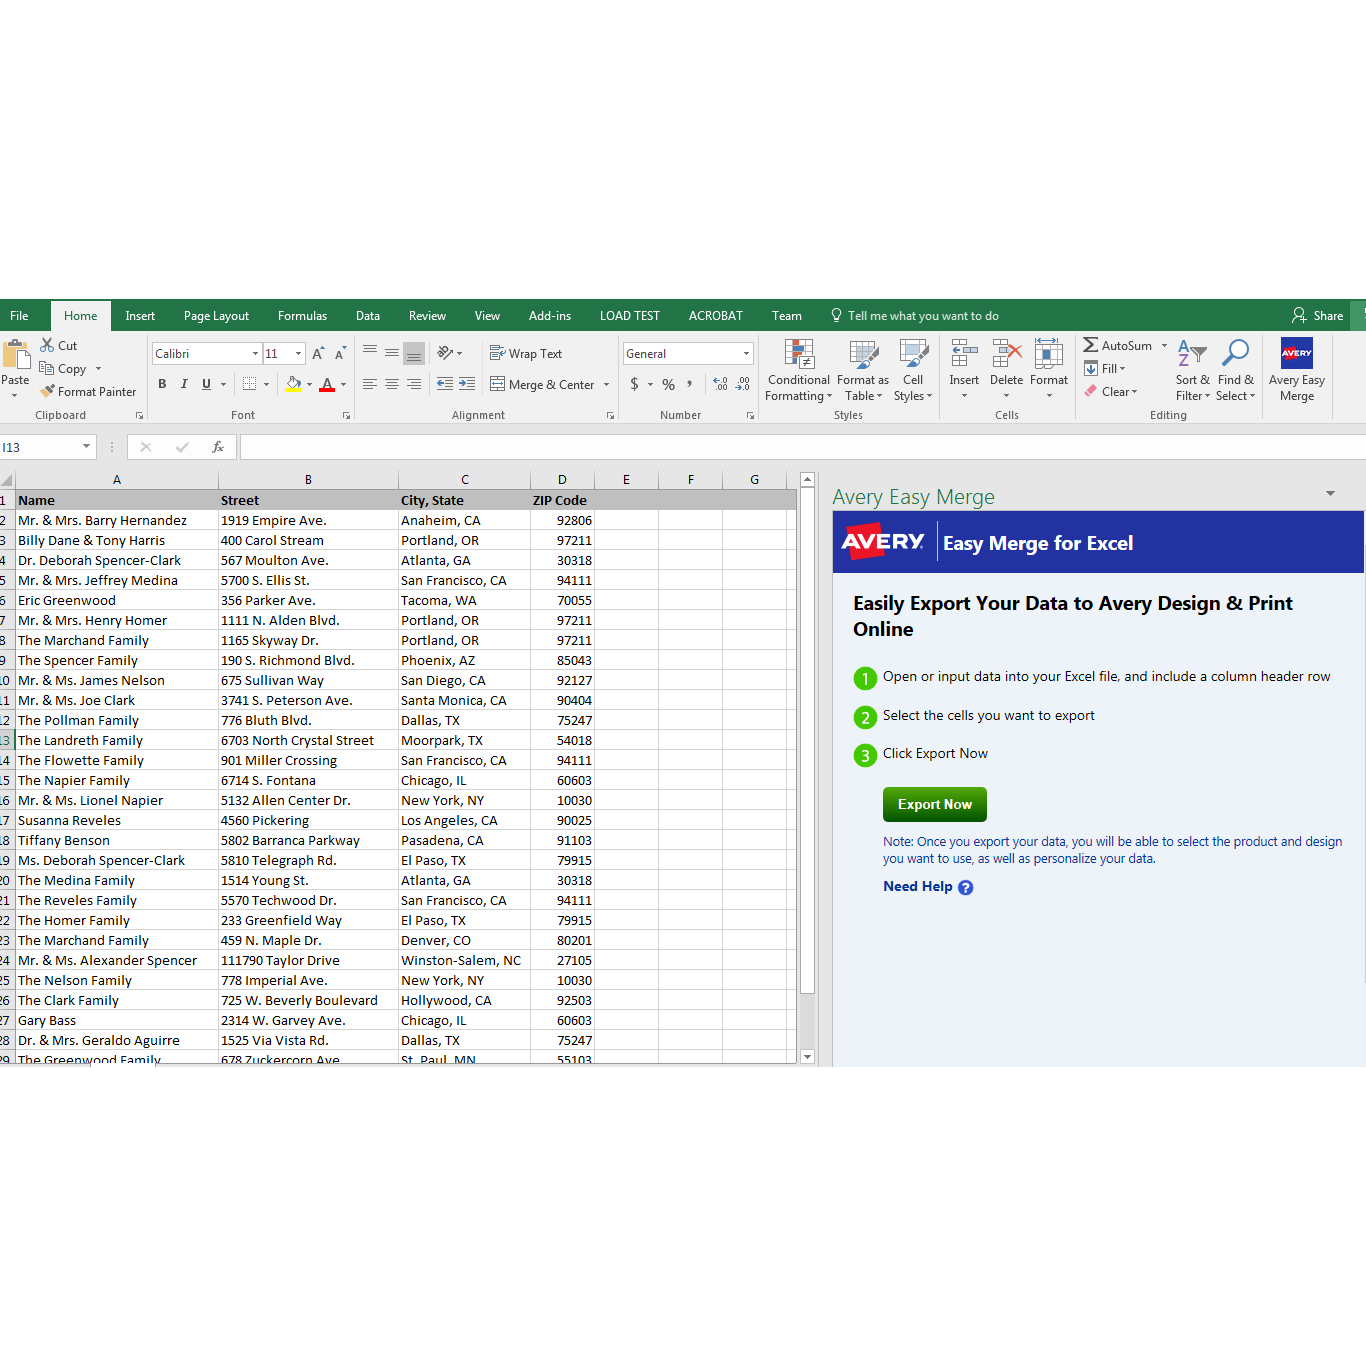 how to make excel sheet shared in office 365